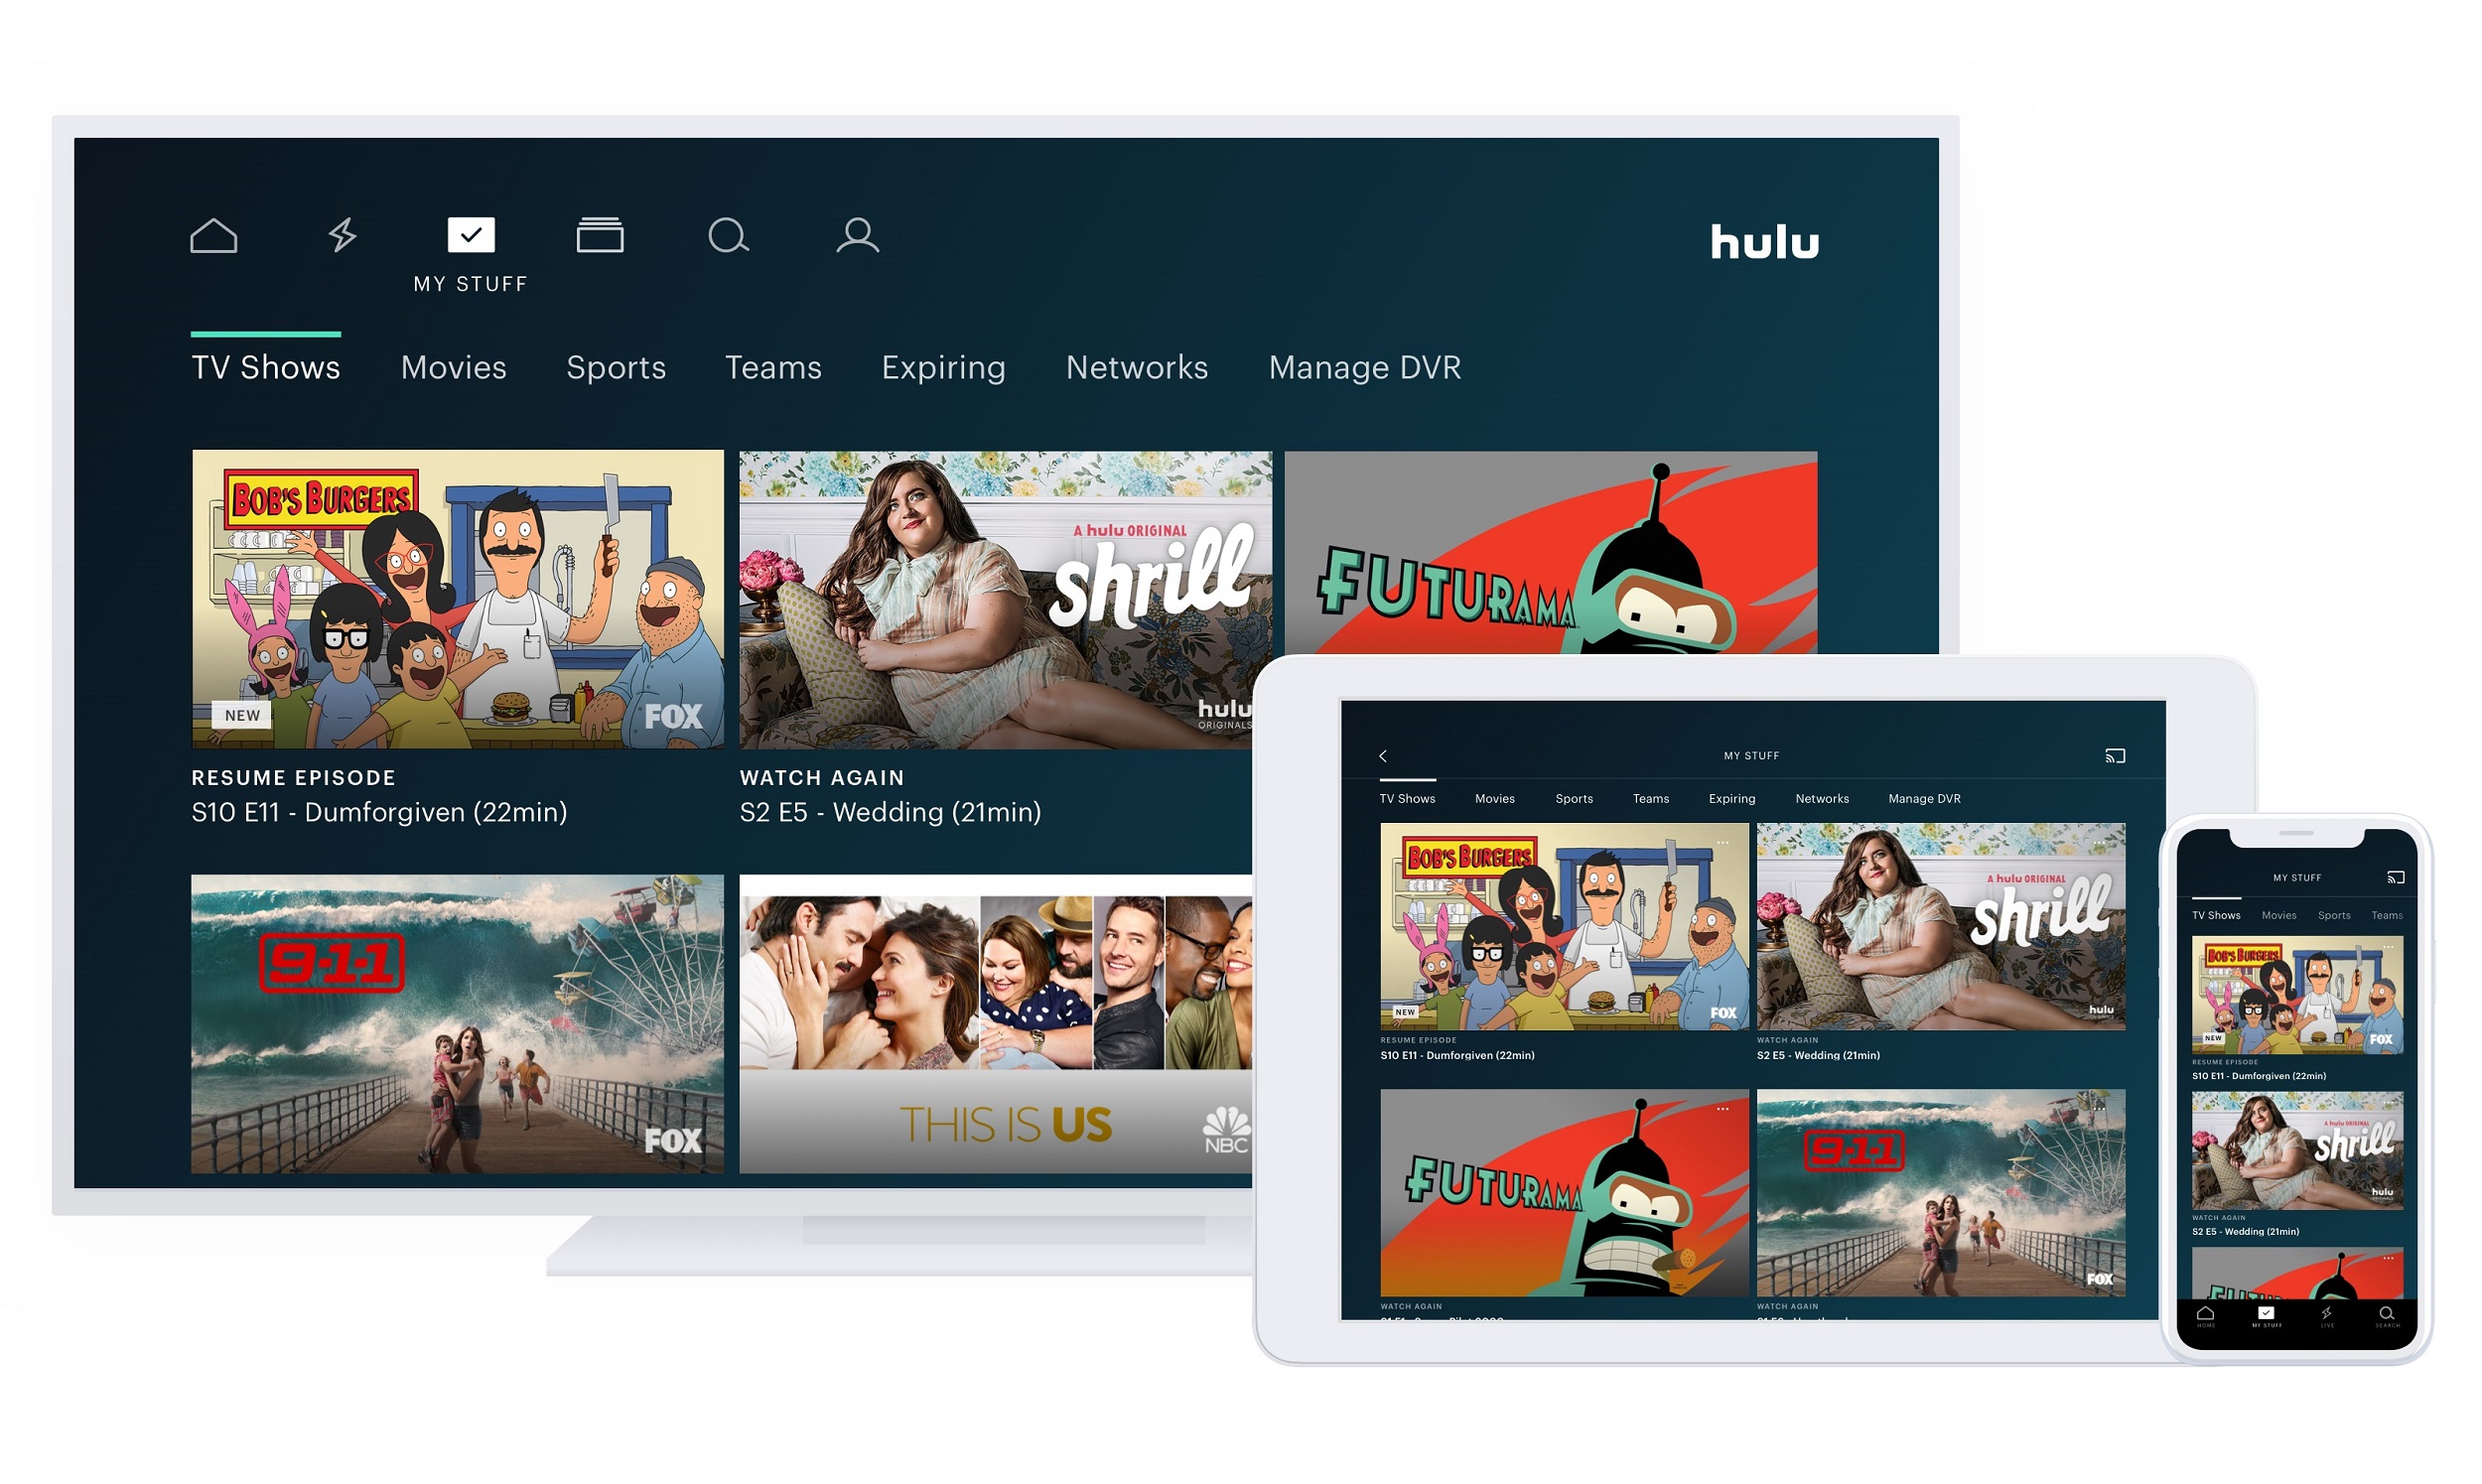 Save $10 a month on Hulu + Live TV with this killer limited time deal